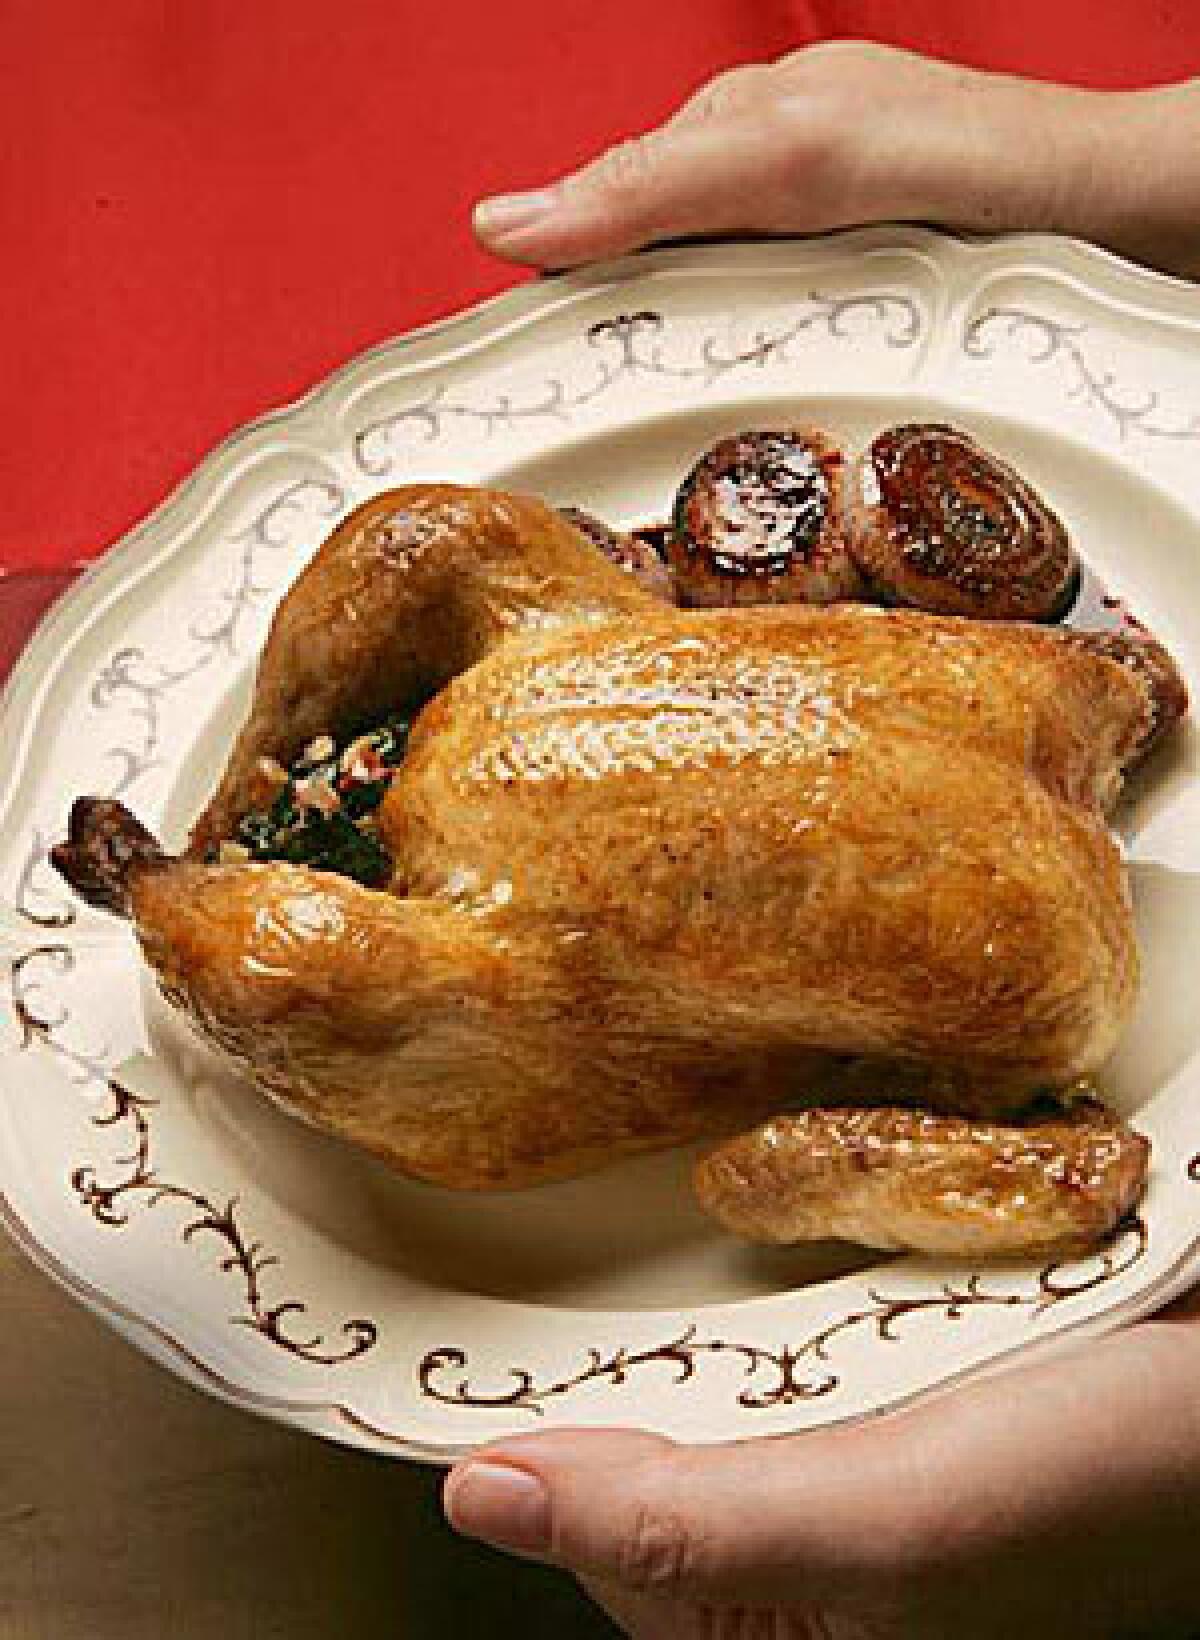 Serve guests game hens stuffed with kale, walnuts and cranberries, and they get both white and dark meat. Recipe: Game hens stuffed with kale, walnuts and cranberries